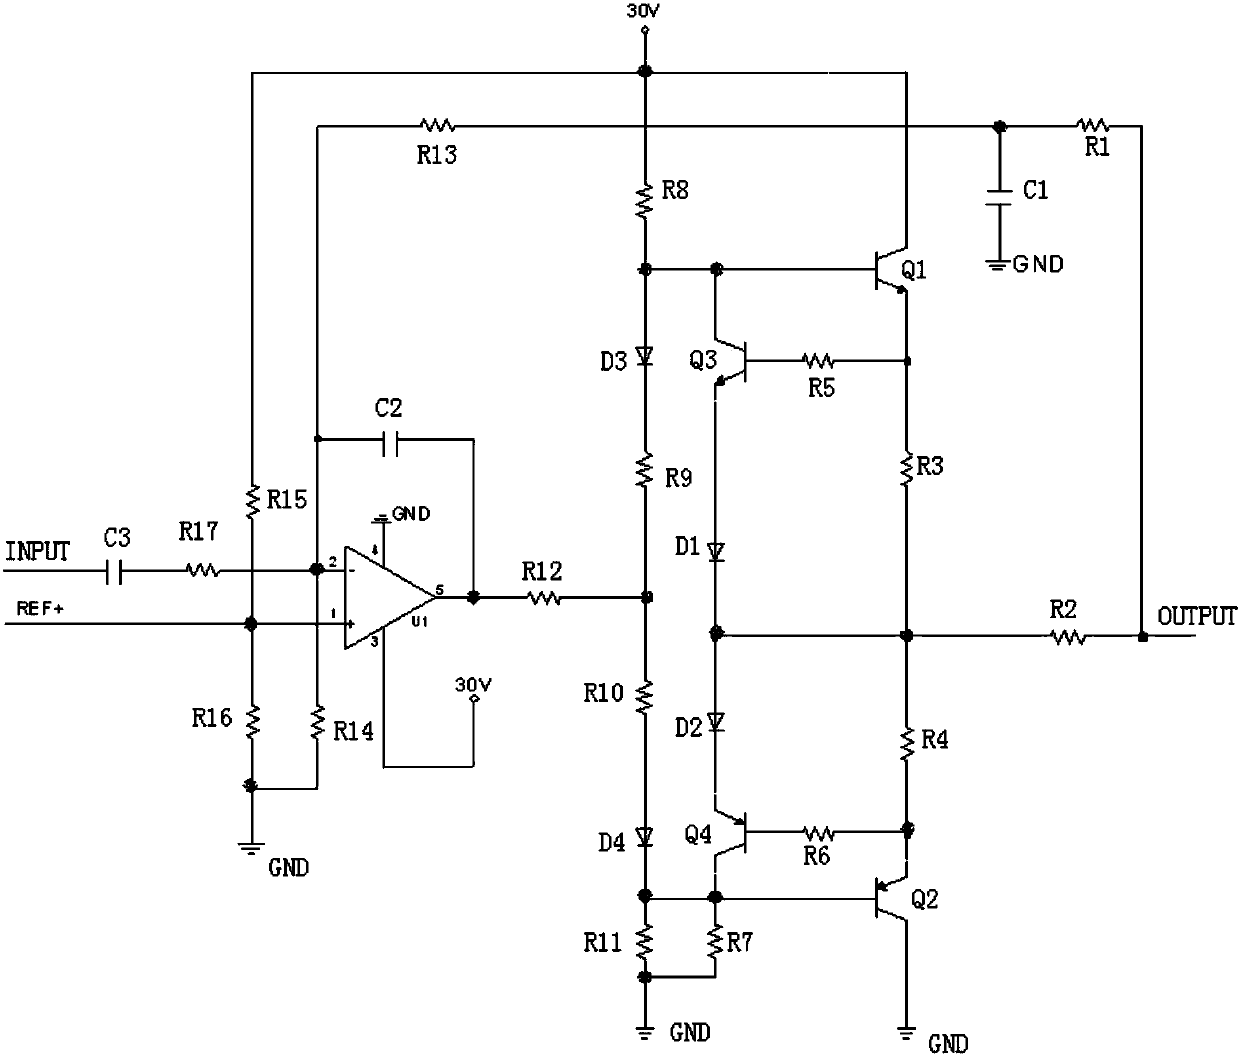 Push-pull circuit and gain amplification circuit composed of same